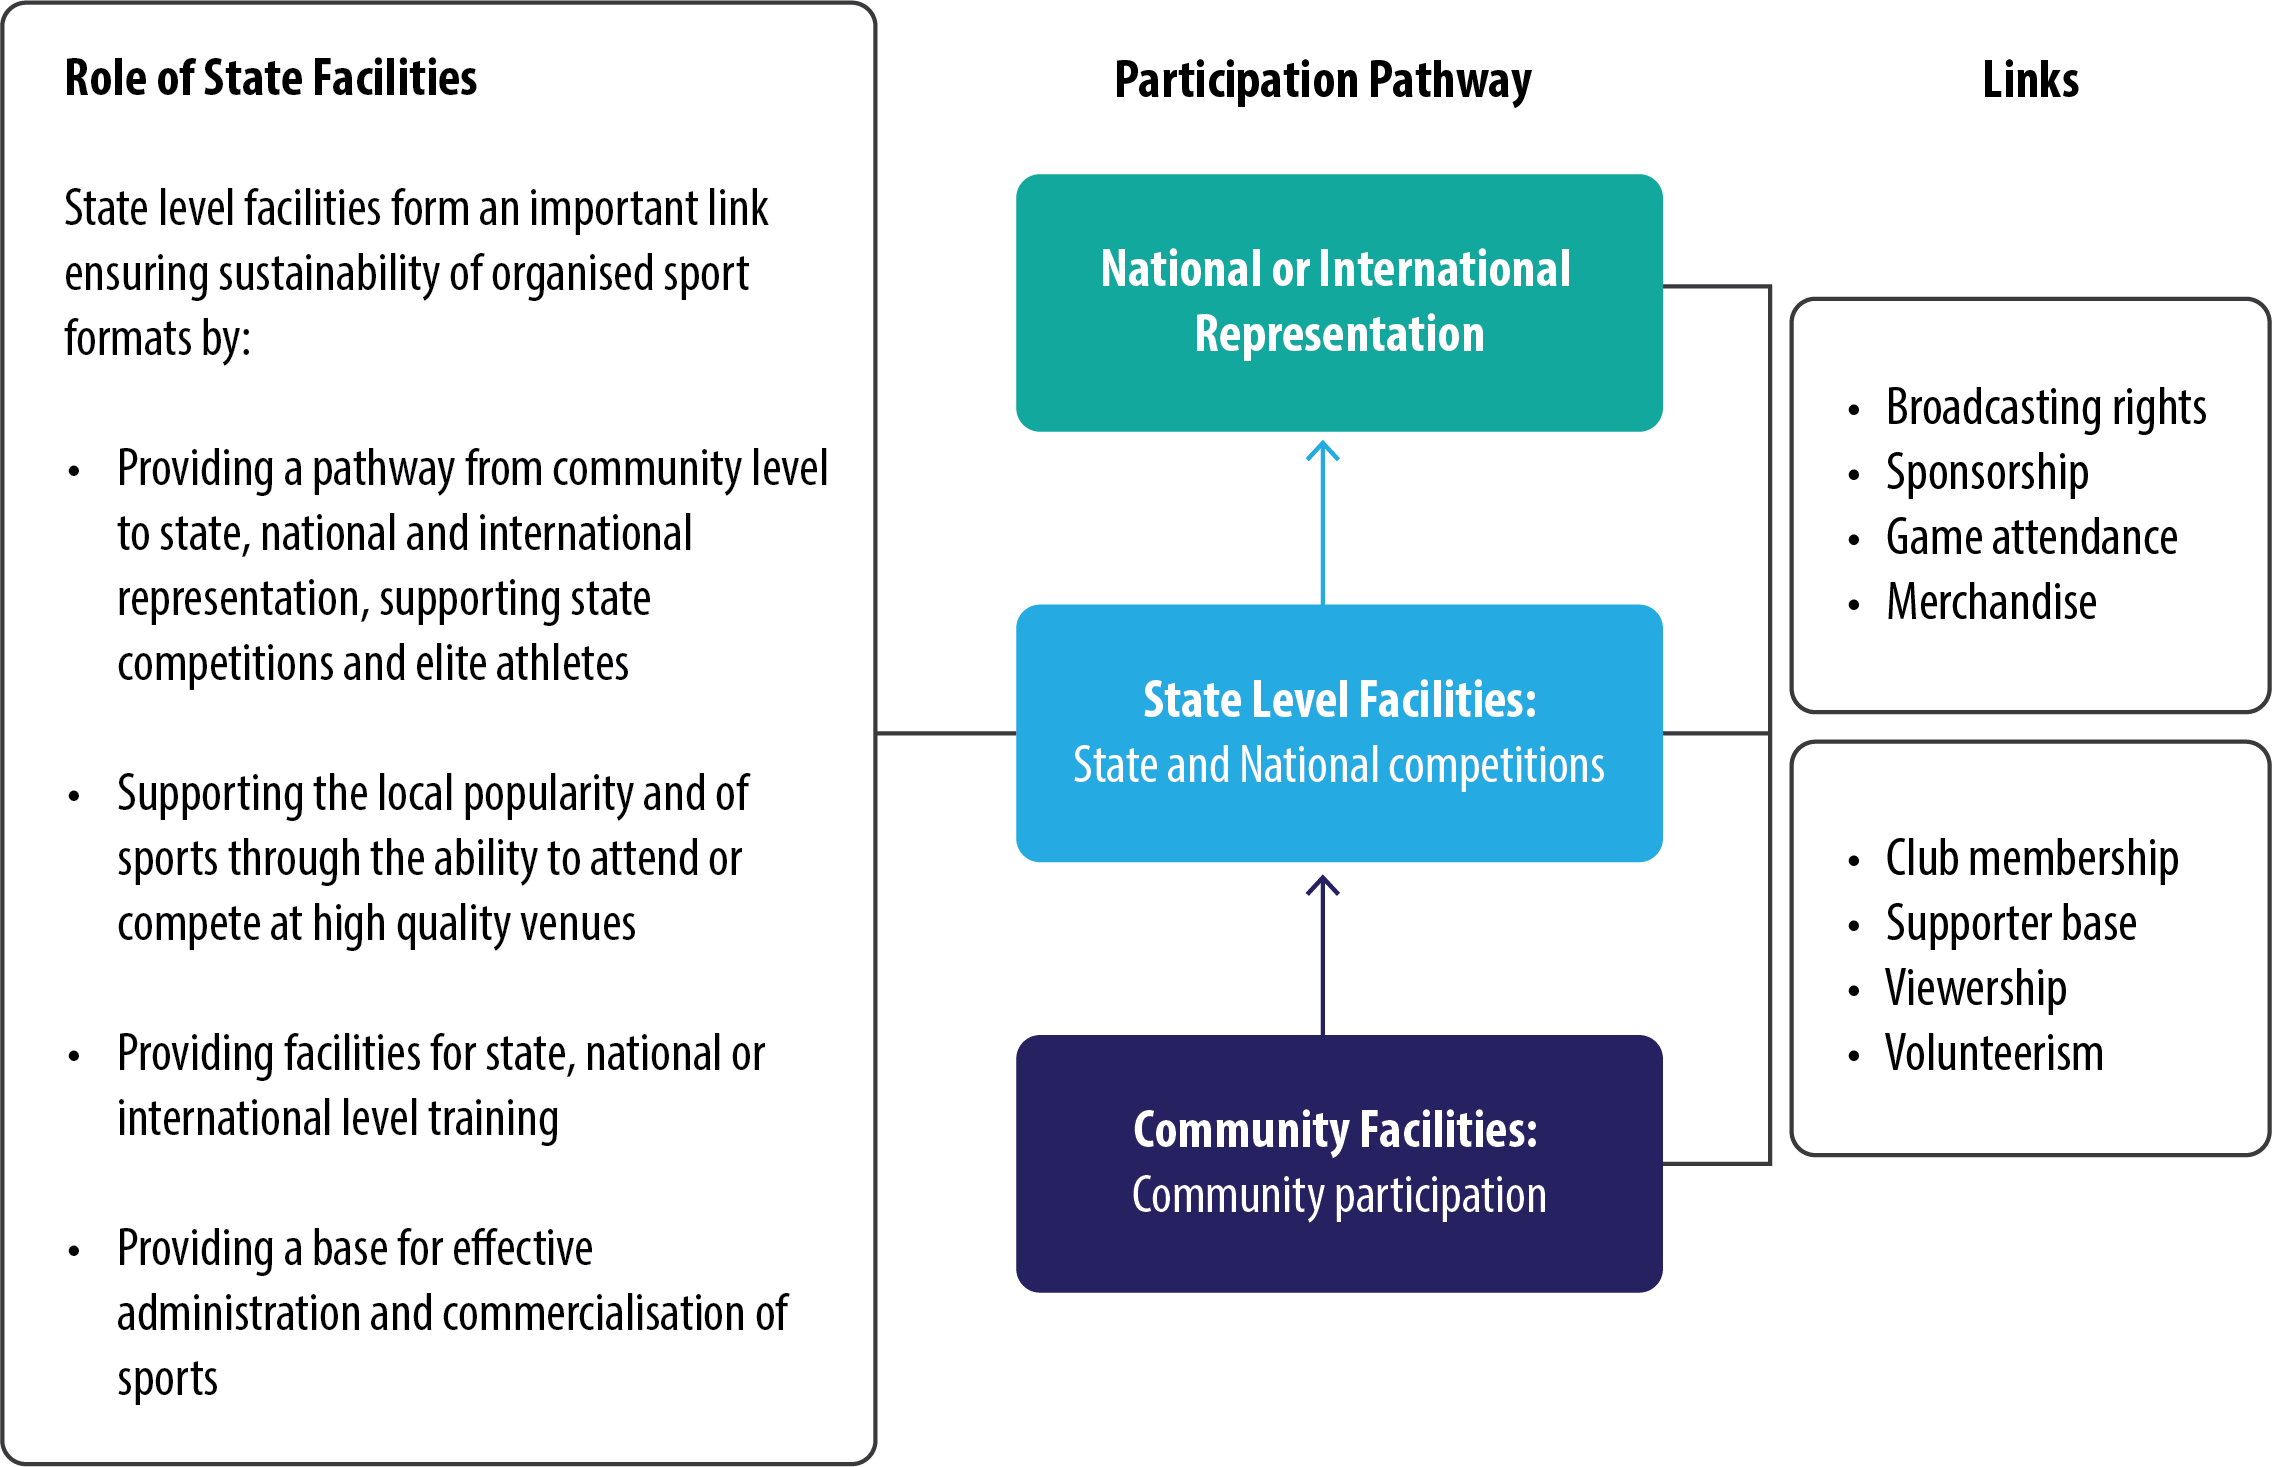 Figure 1. The Role of State Sporting Infrastructure